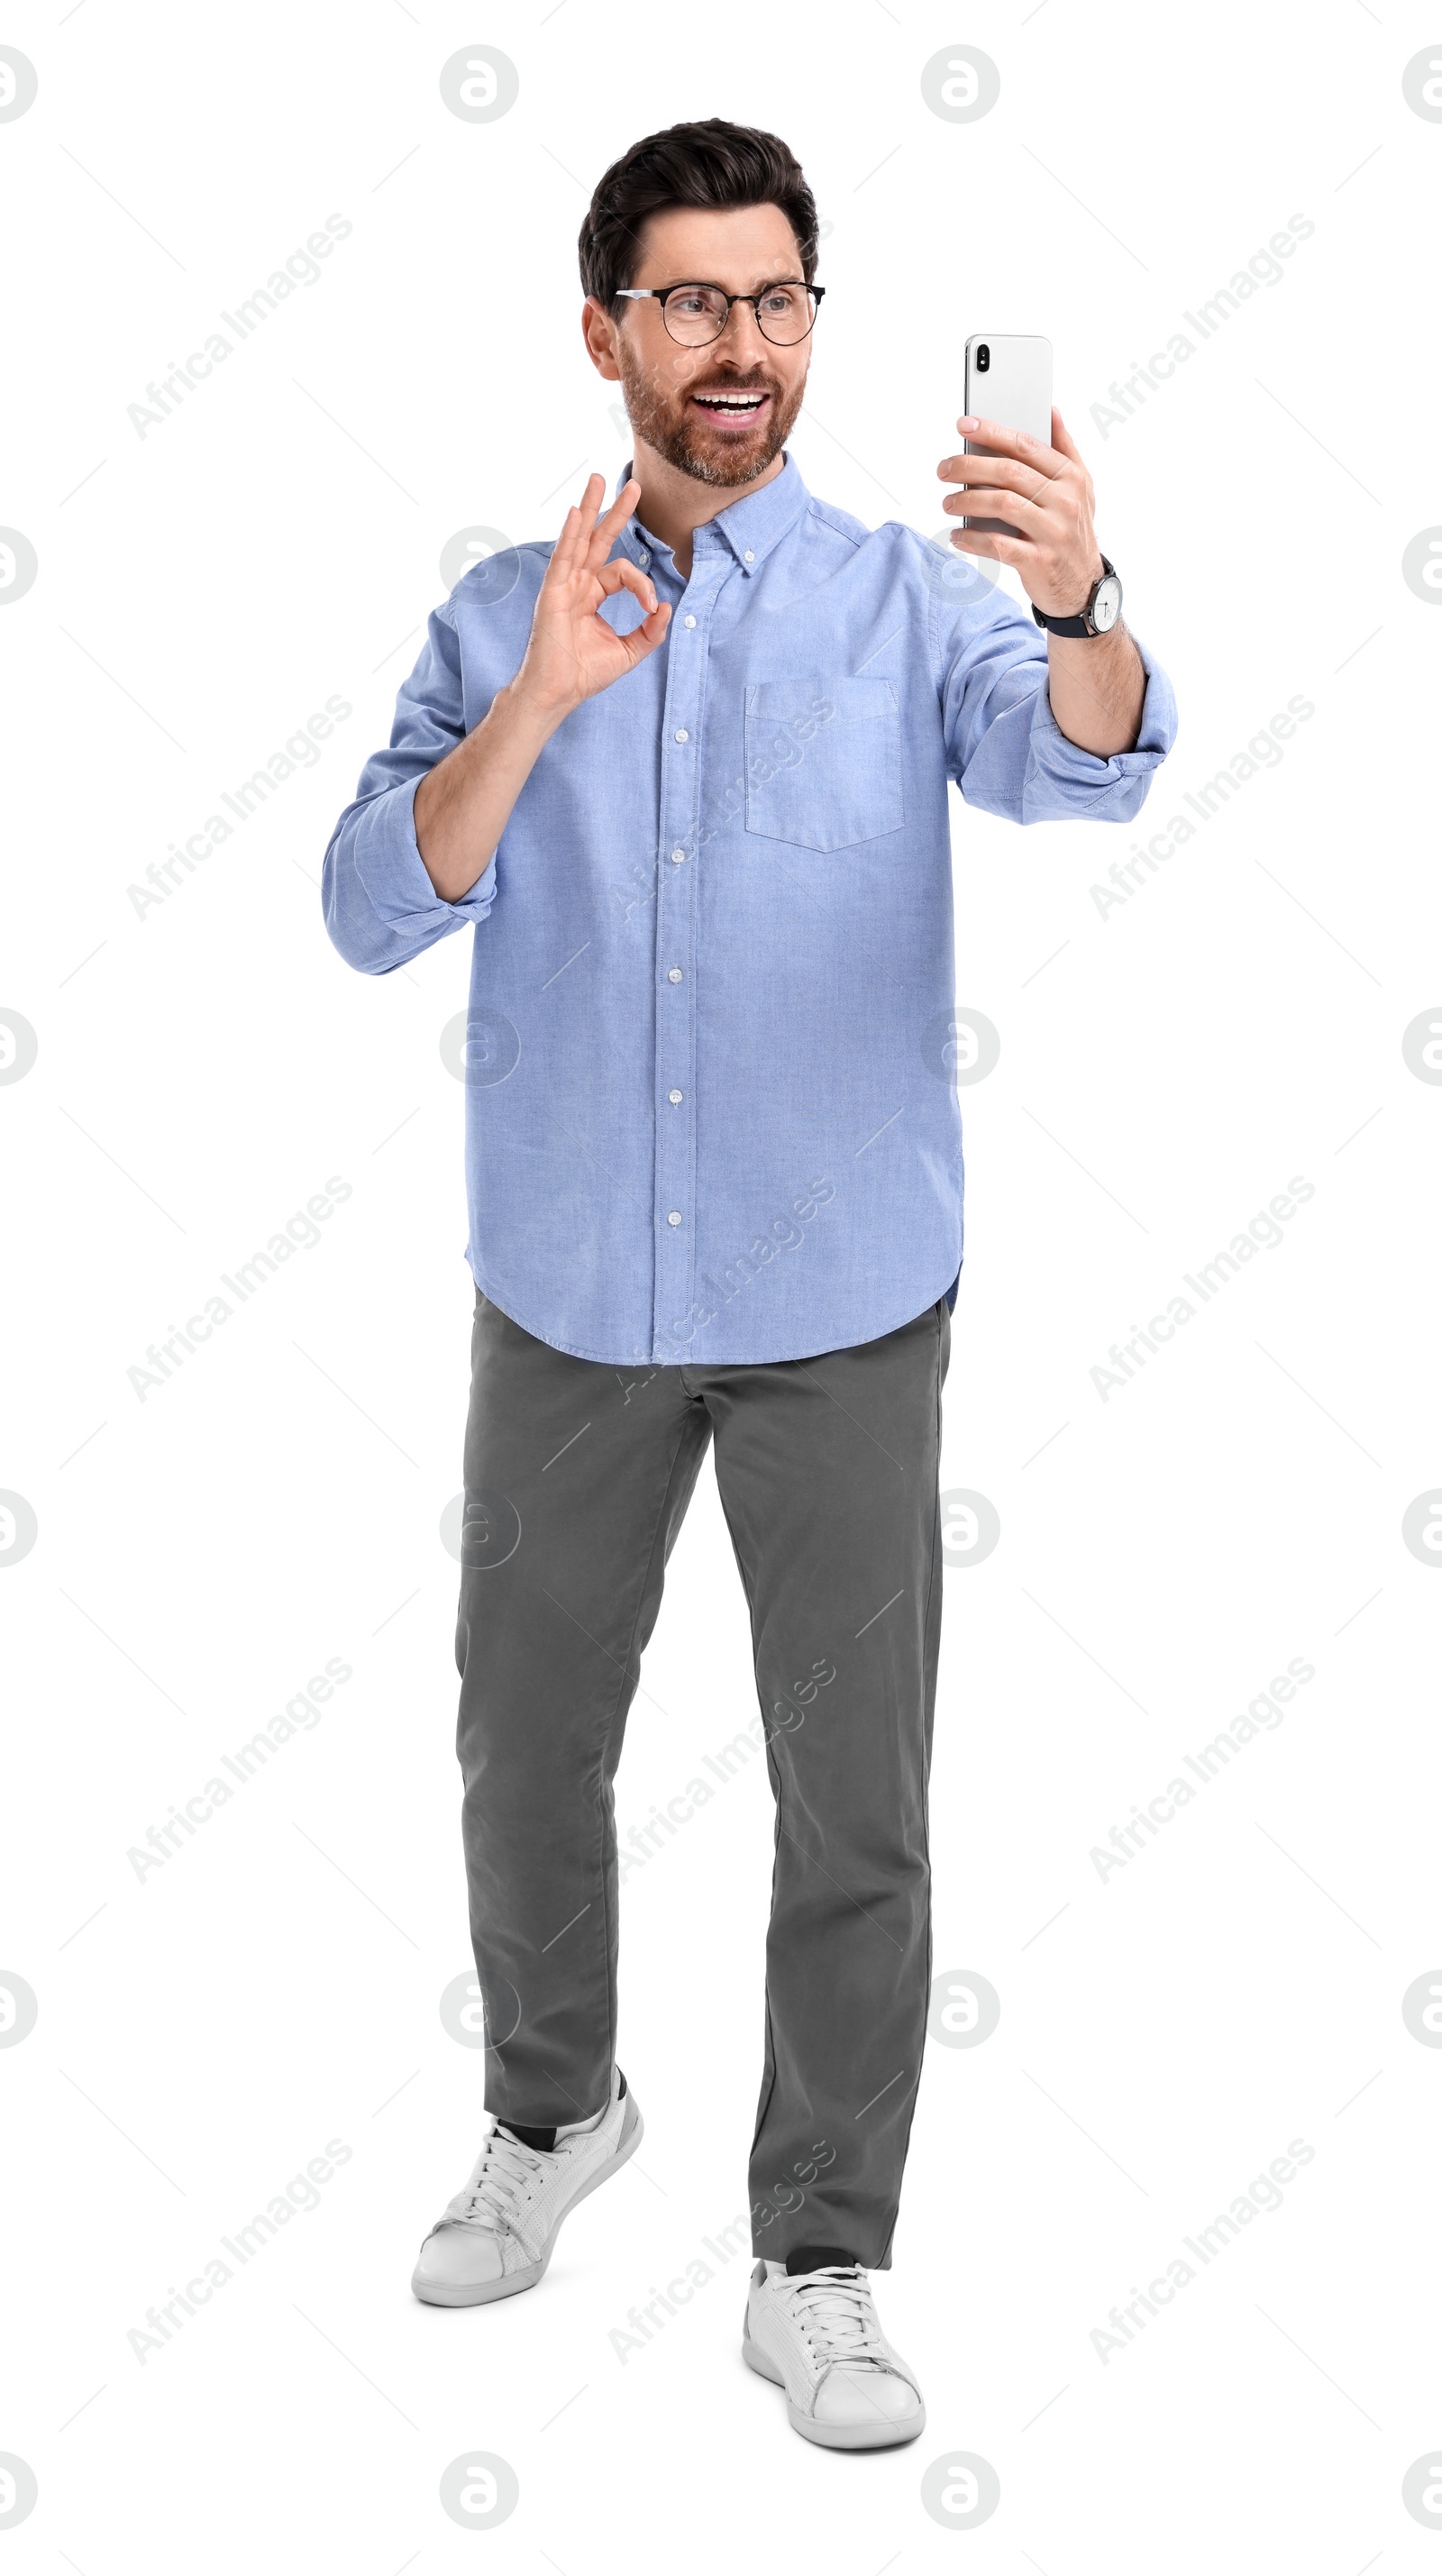 Photo of Smiling man taking selfie with smartphone and showing OK gesture on white background